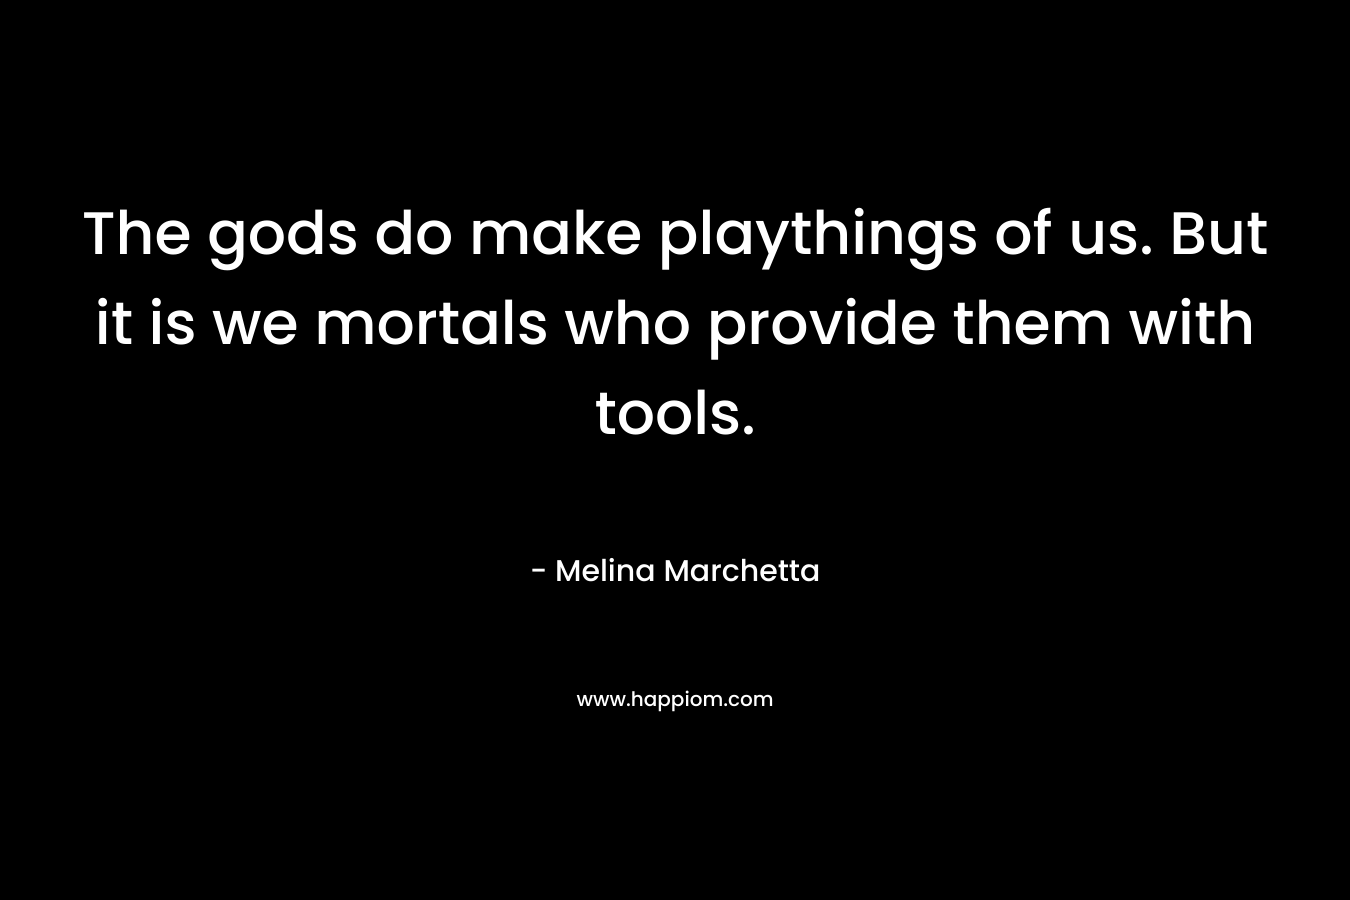 The gods do make playthings of us. But it is we mortals who provide them with tools.